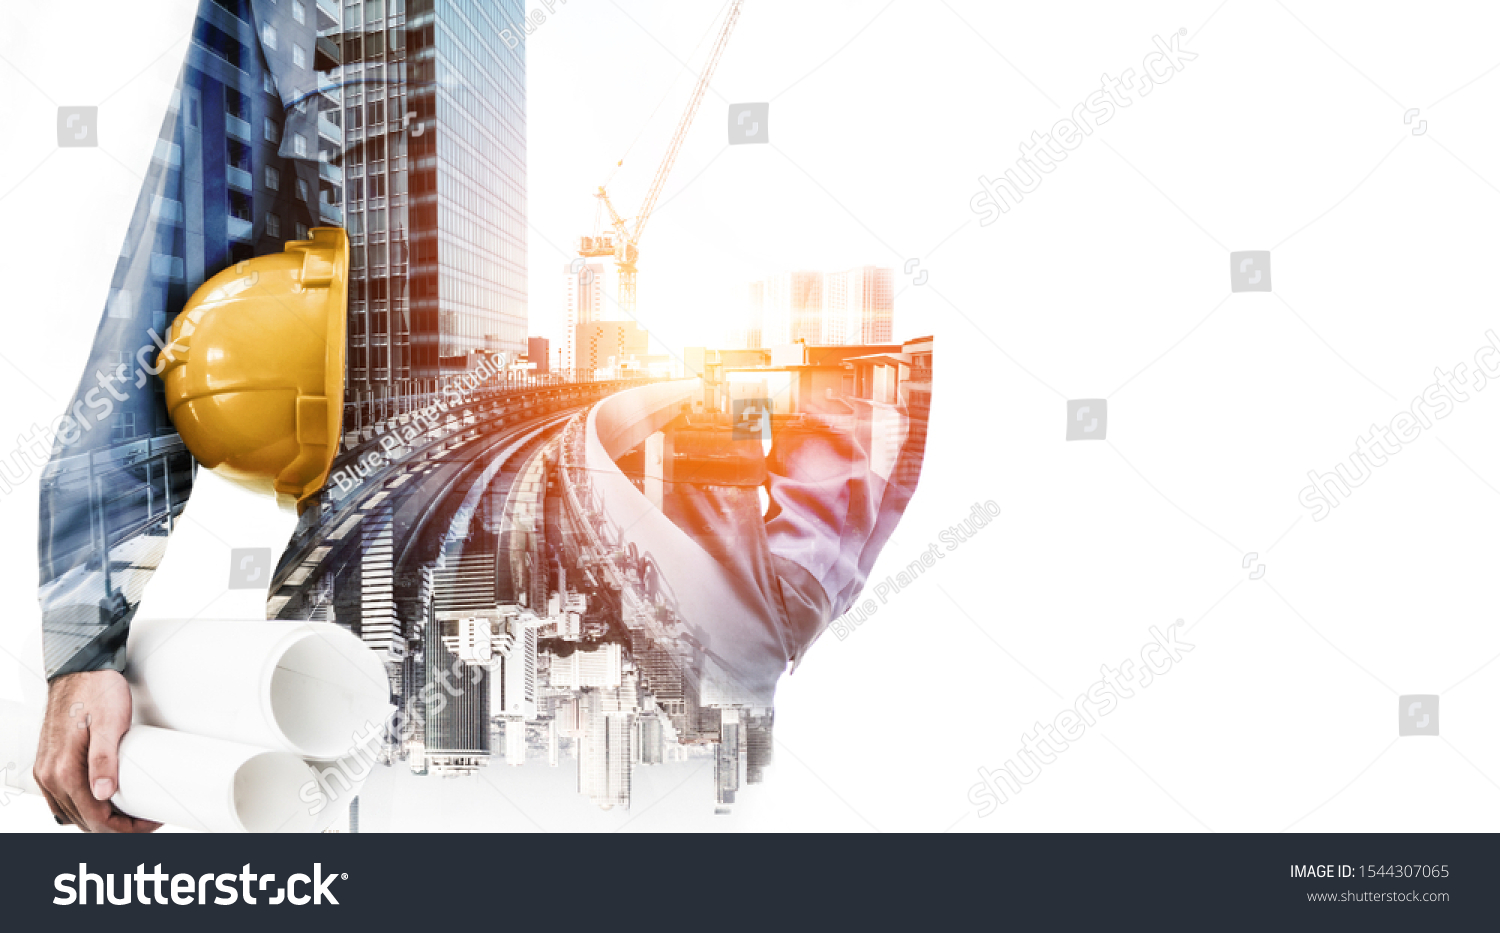 Double exposure image of construction worker holding safety helmet and construction drawing against the background of surreal construction site in the city. #1544307065